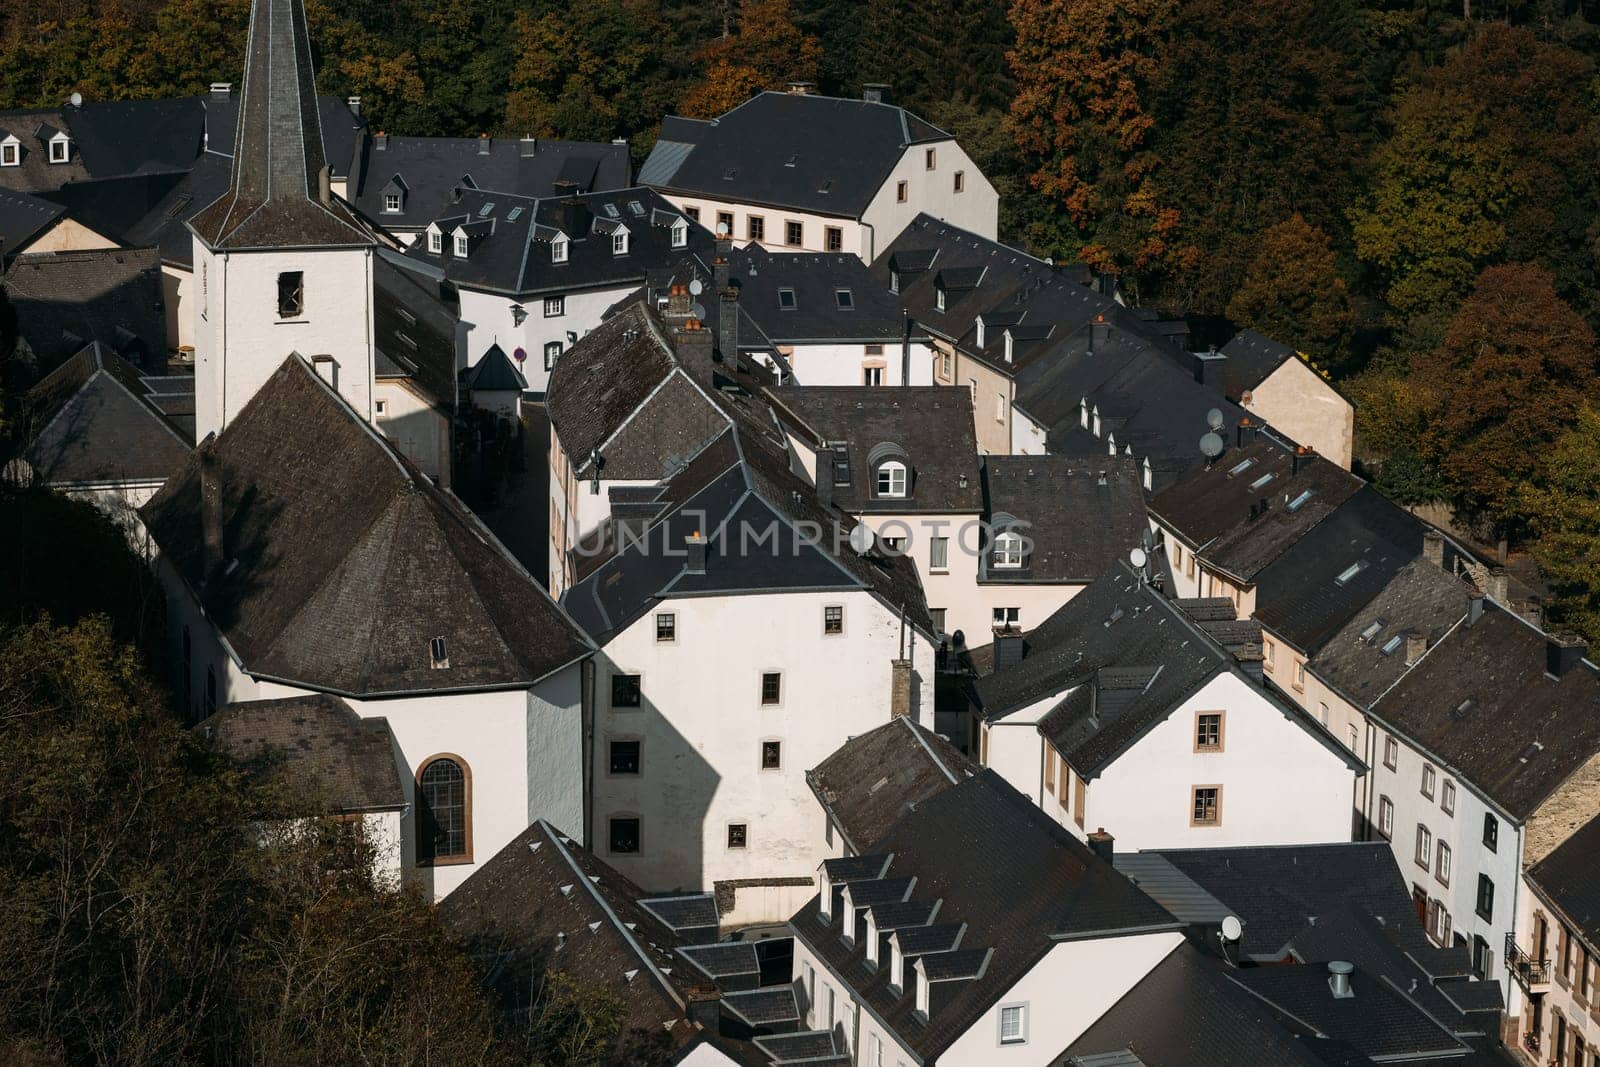 Ancient town with identical houses with white facades and dark roofs by apavlin